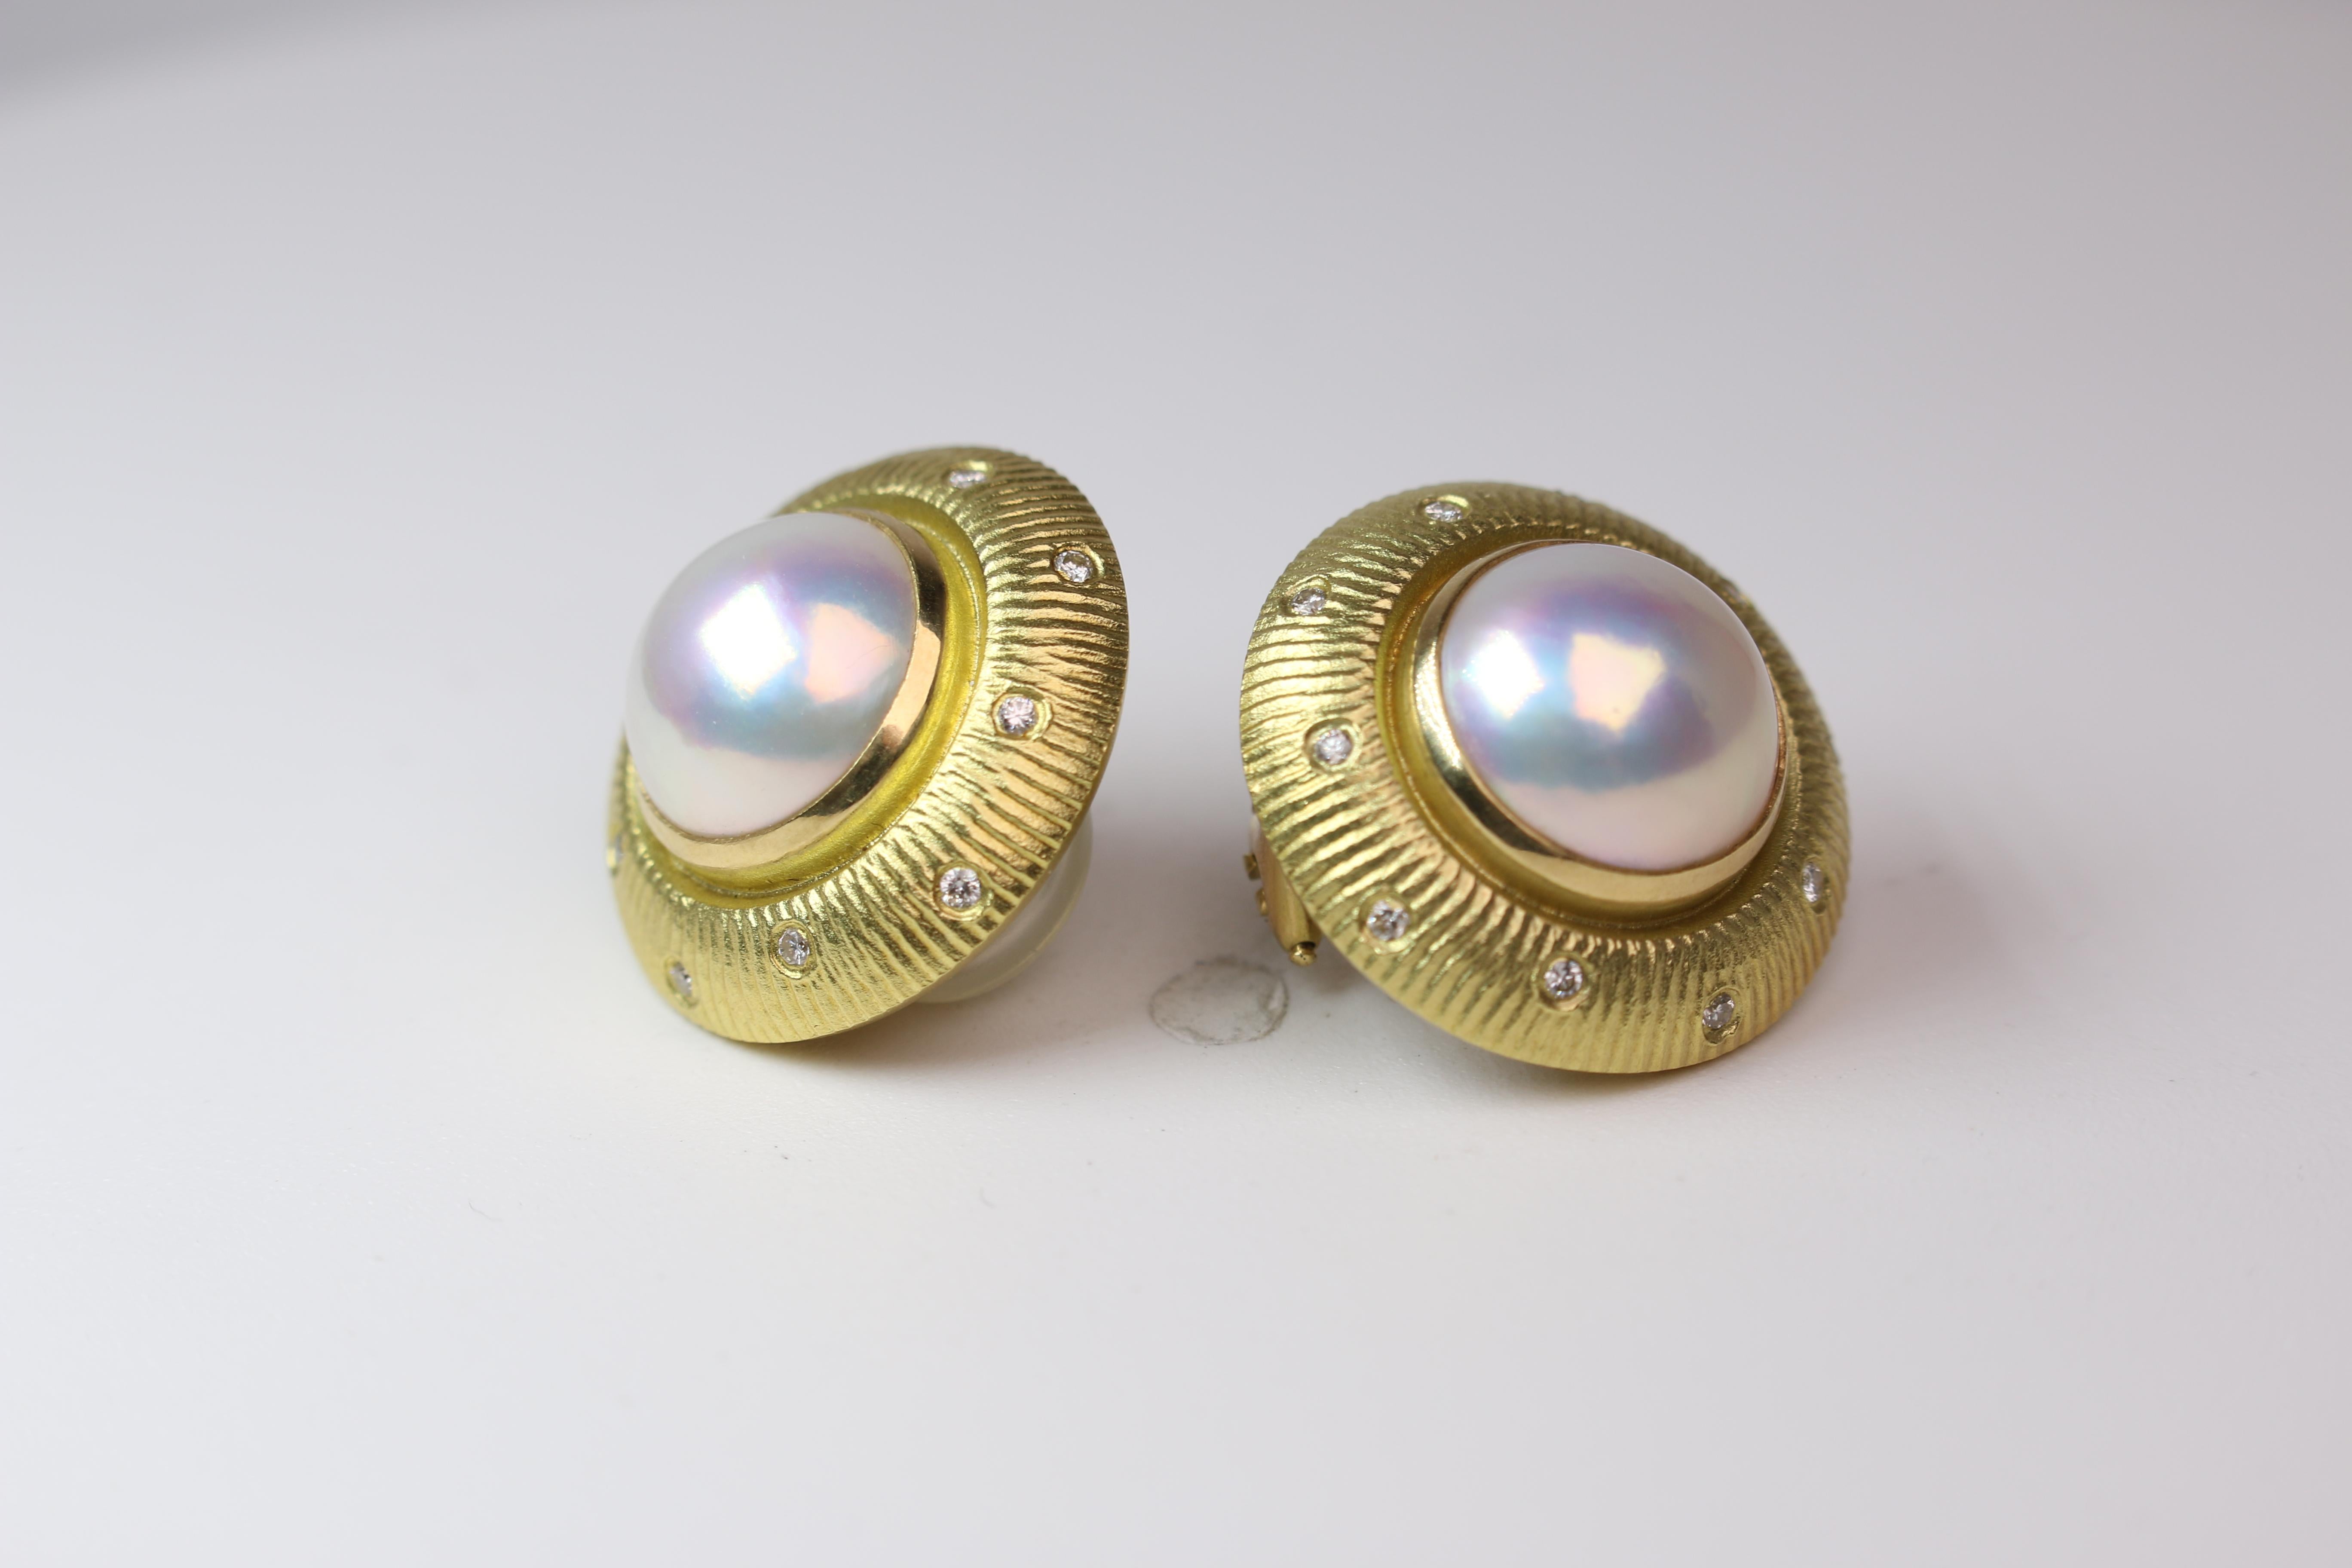 This set of Mabe pearl and Diamond Earrings set in 18k Yellow gold comes from Paul Morelli and are absolutely stunning on the ear. The earrings weigh in at 20.7gs and measure 7/8ths an inch in diameter. The pearls are 12mm wide while the 12 round